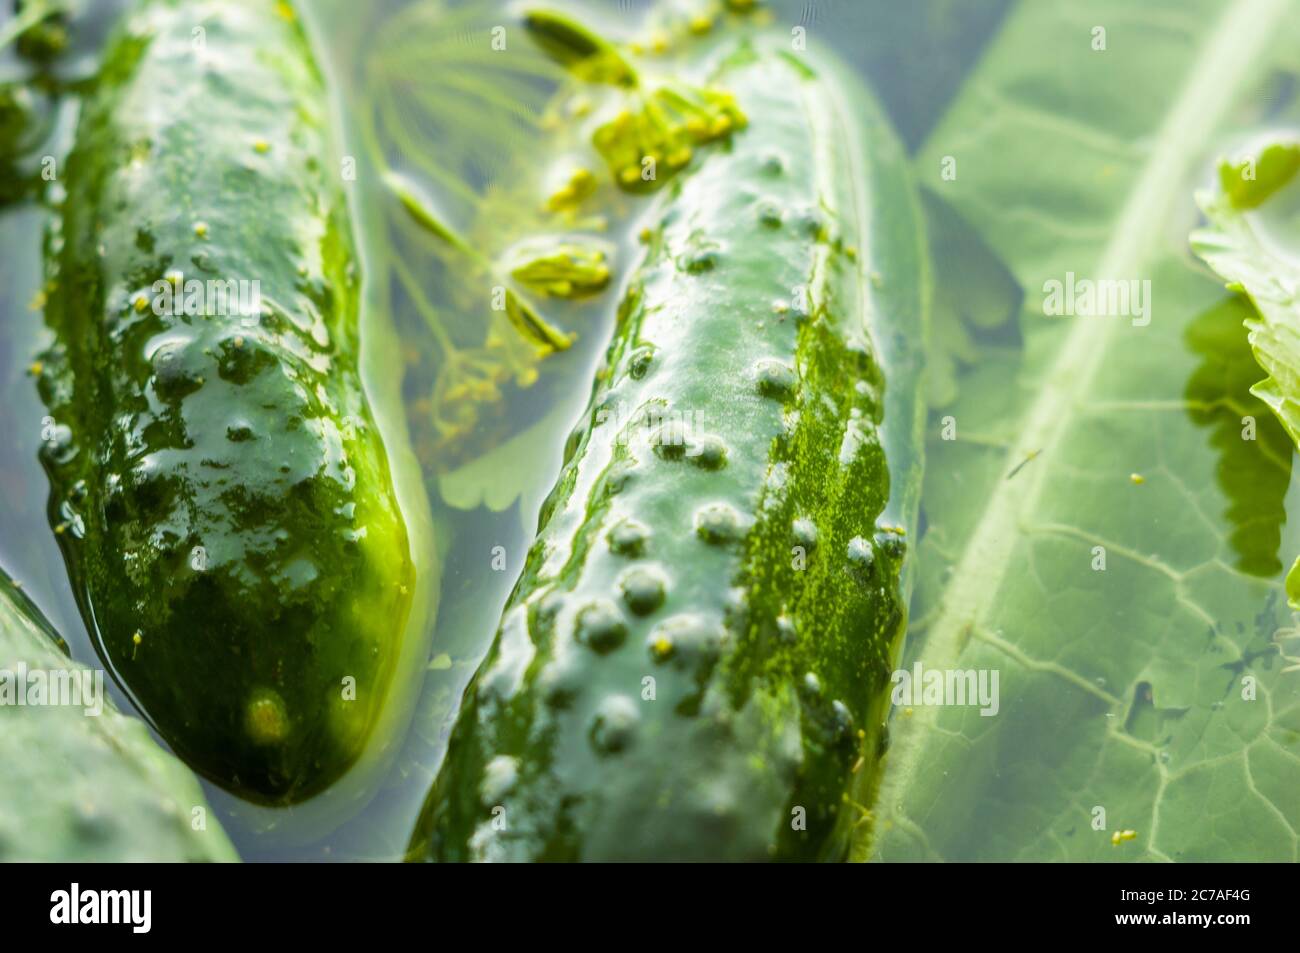 Fresh organic cucumbers and dill in water prepared for pickling, close up Stock Photo